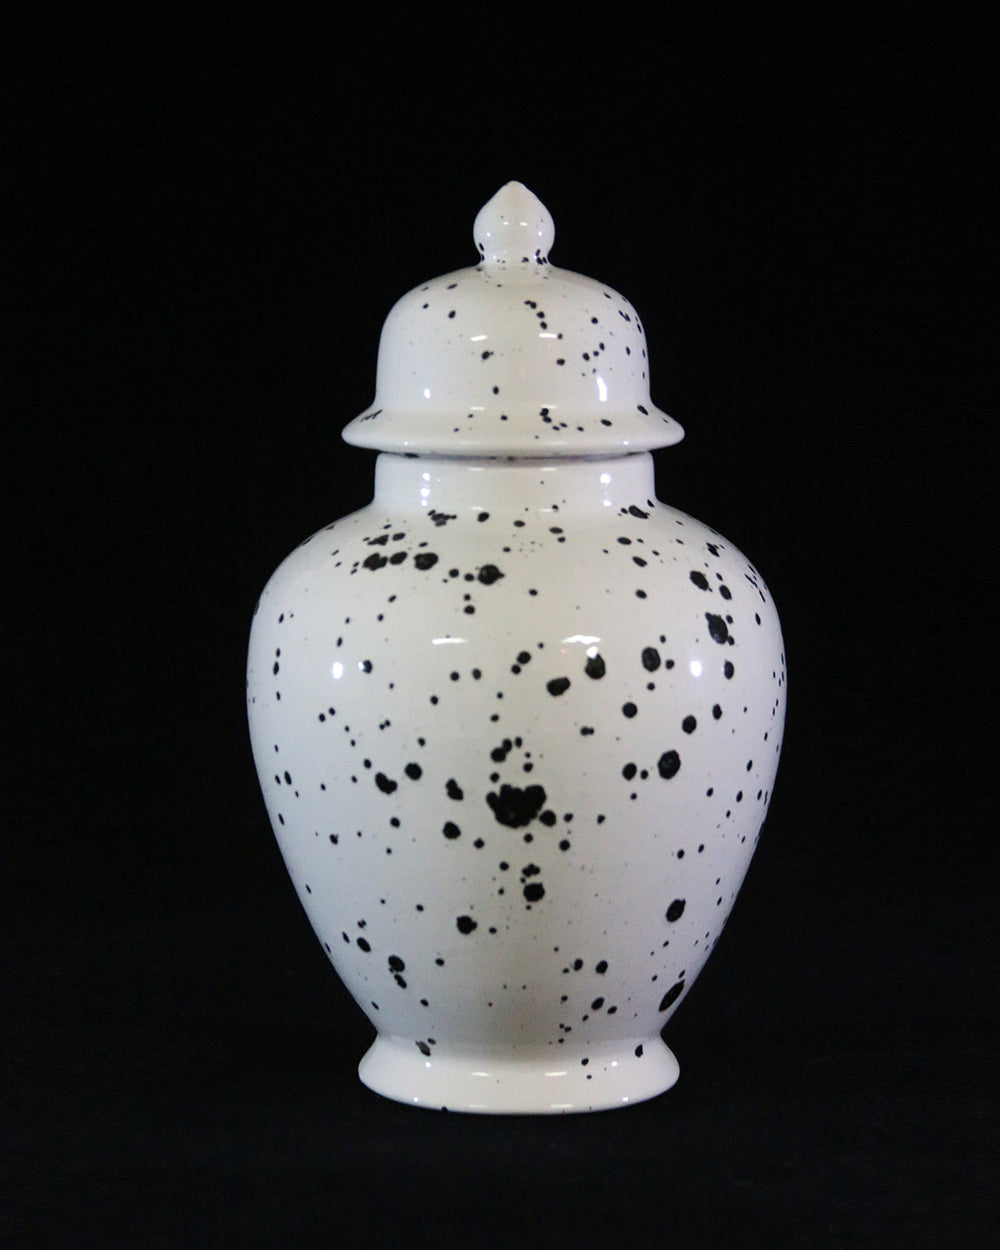 Hancrafted Ceramic Urn - Ink Spots - Large